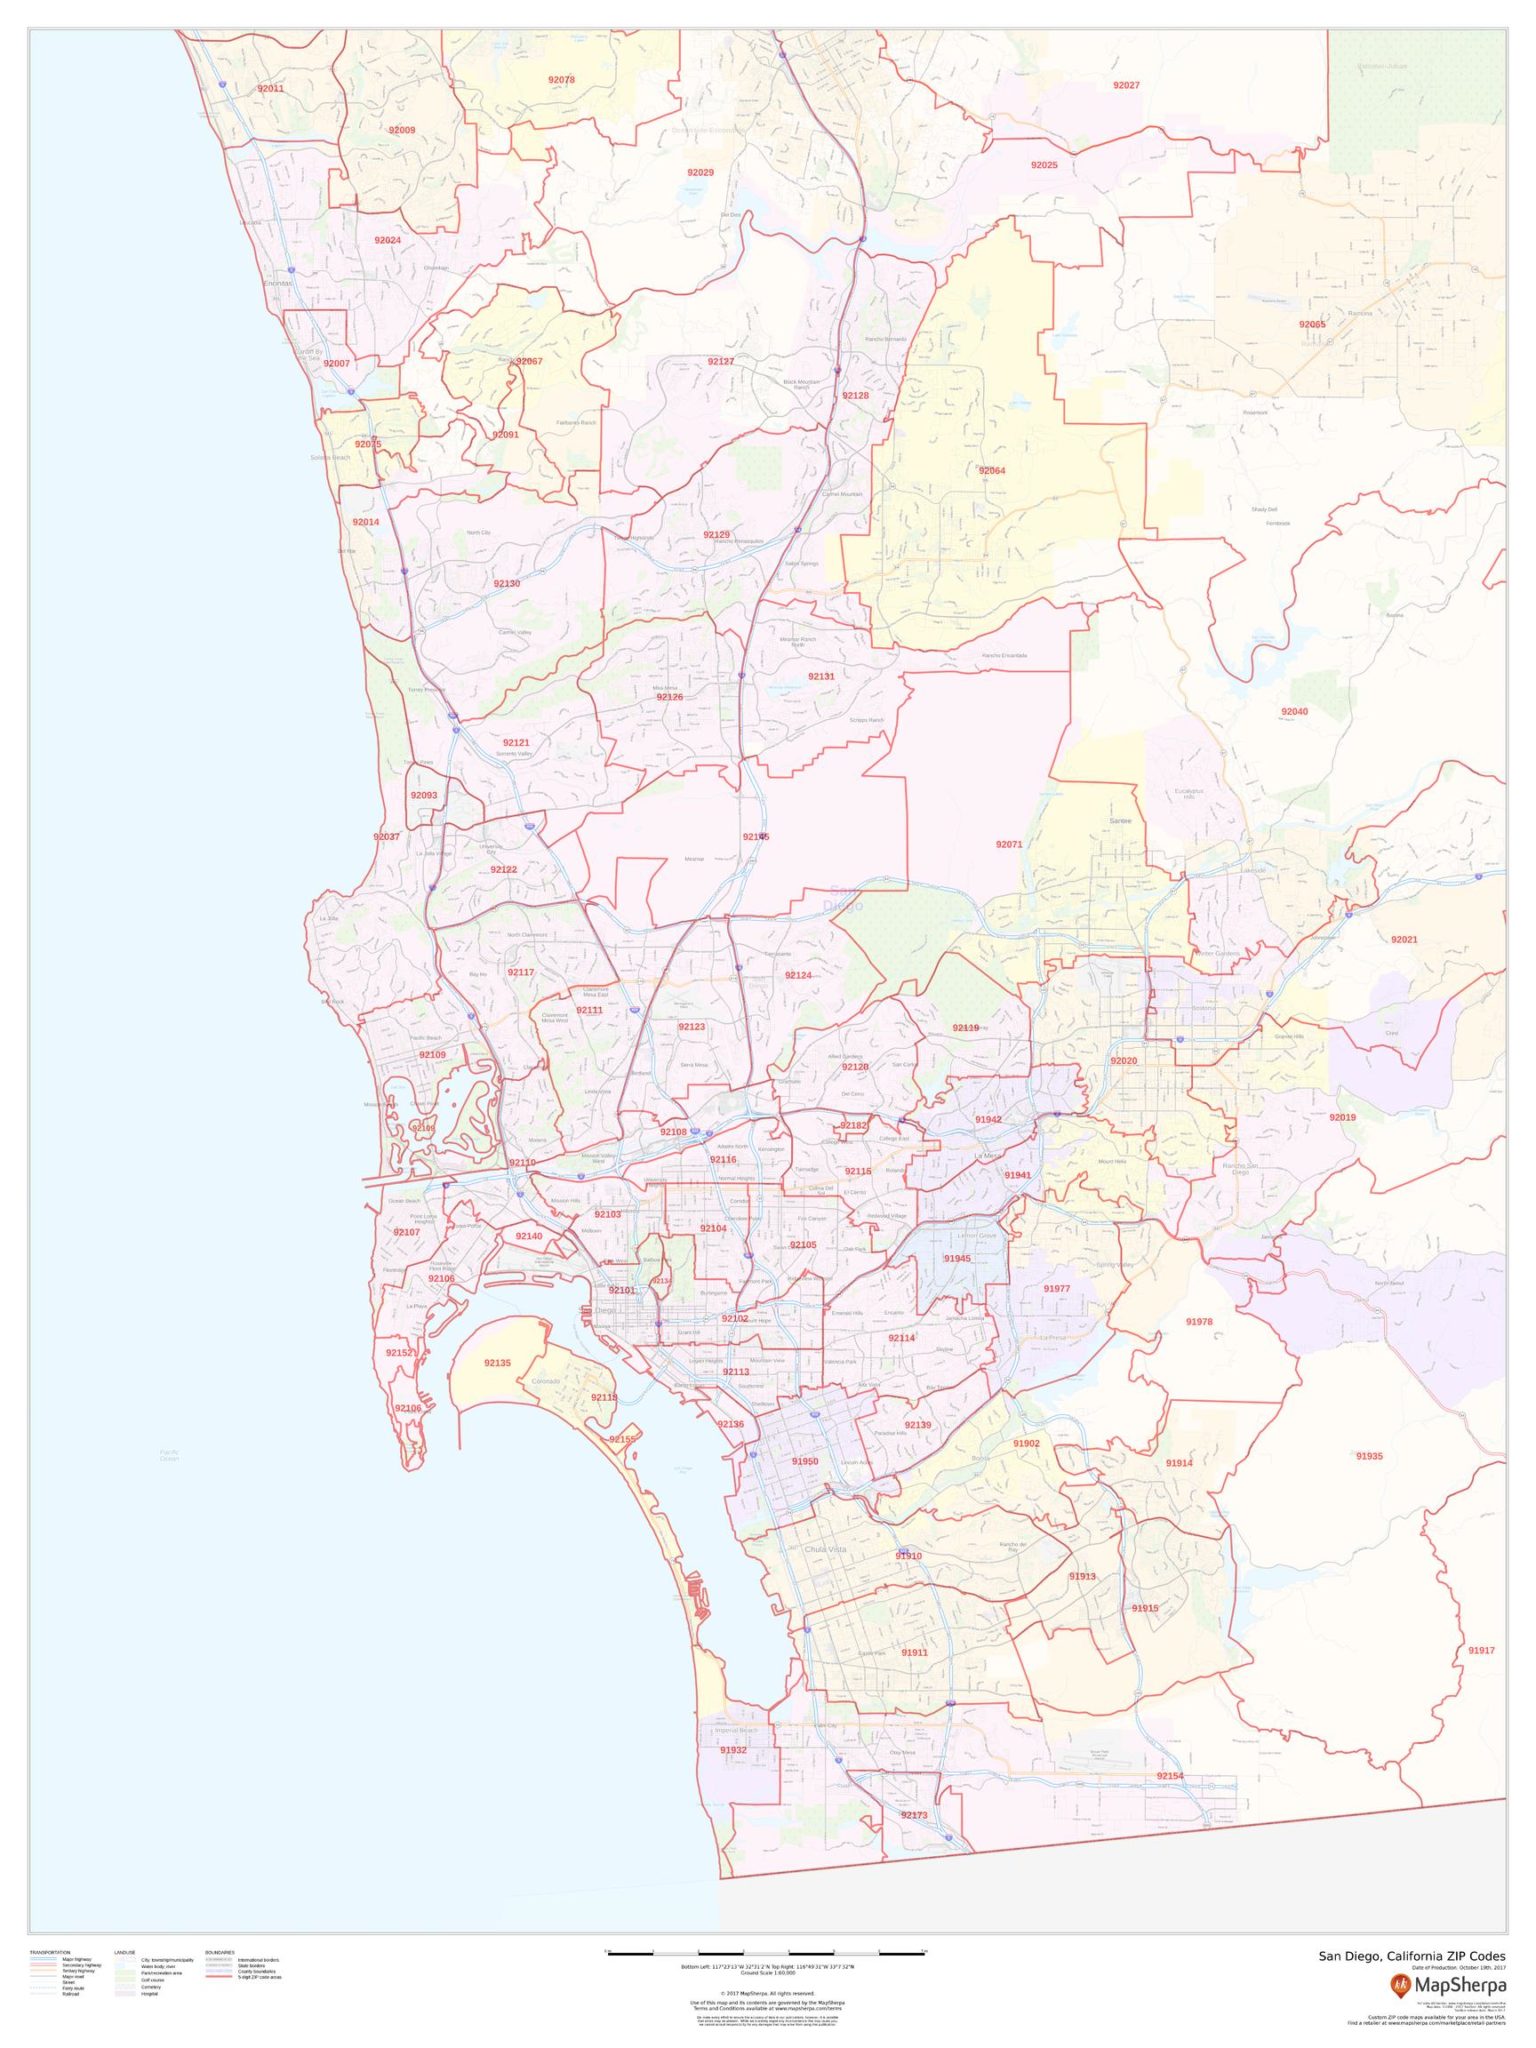 San Diego California Zip Codes By Map Sherpa The Map Shop